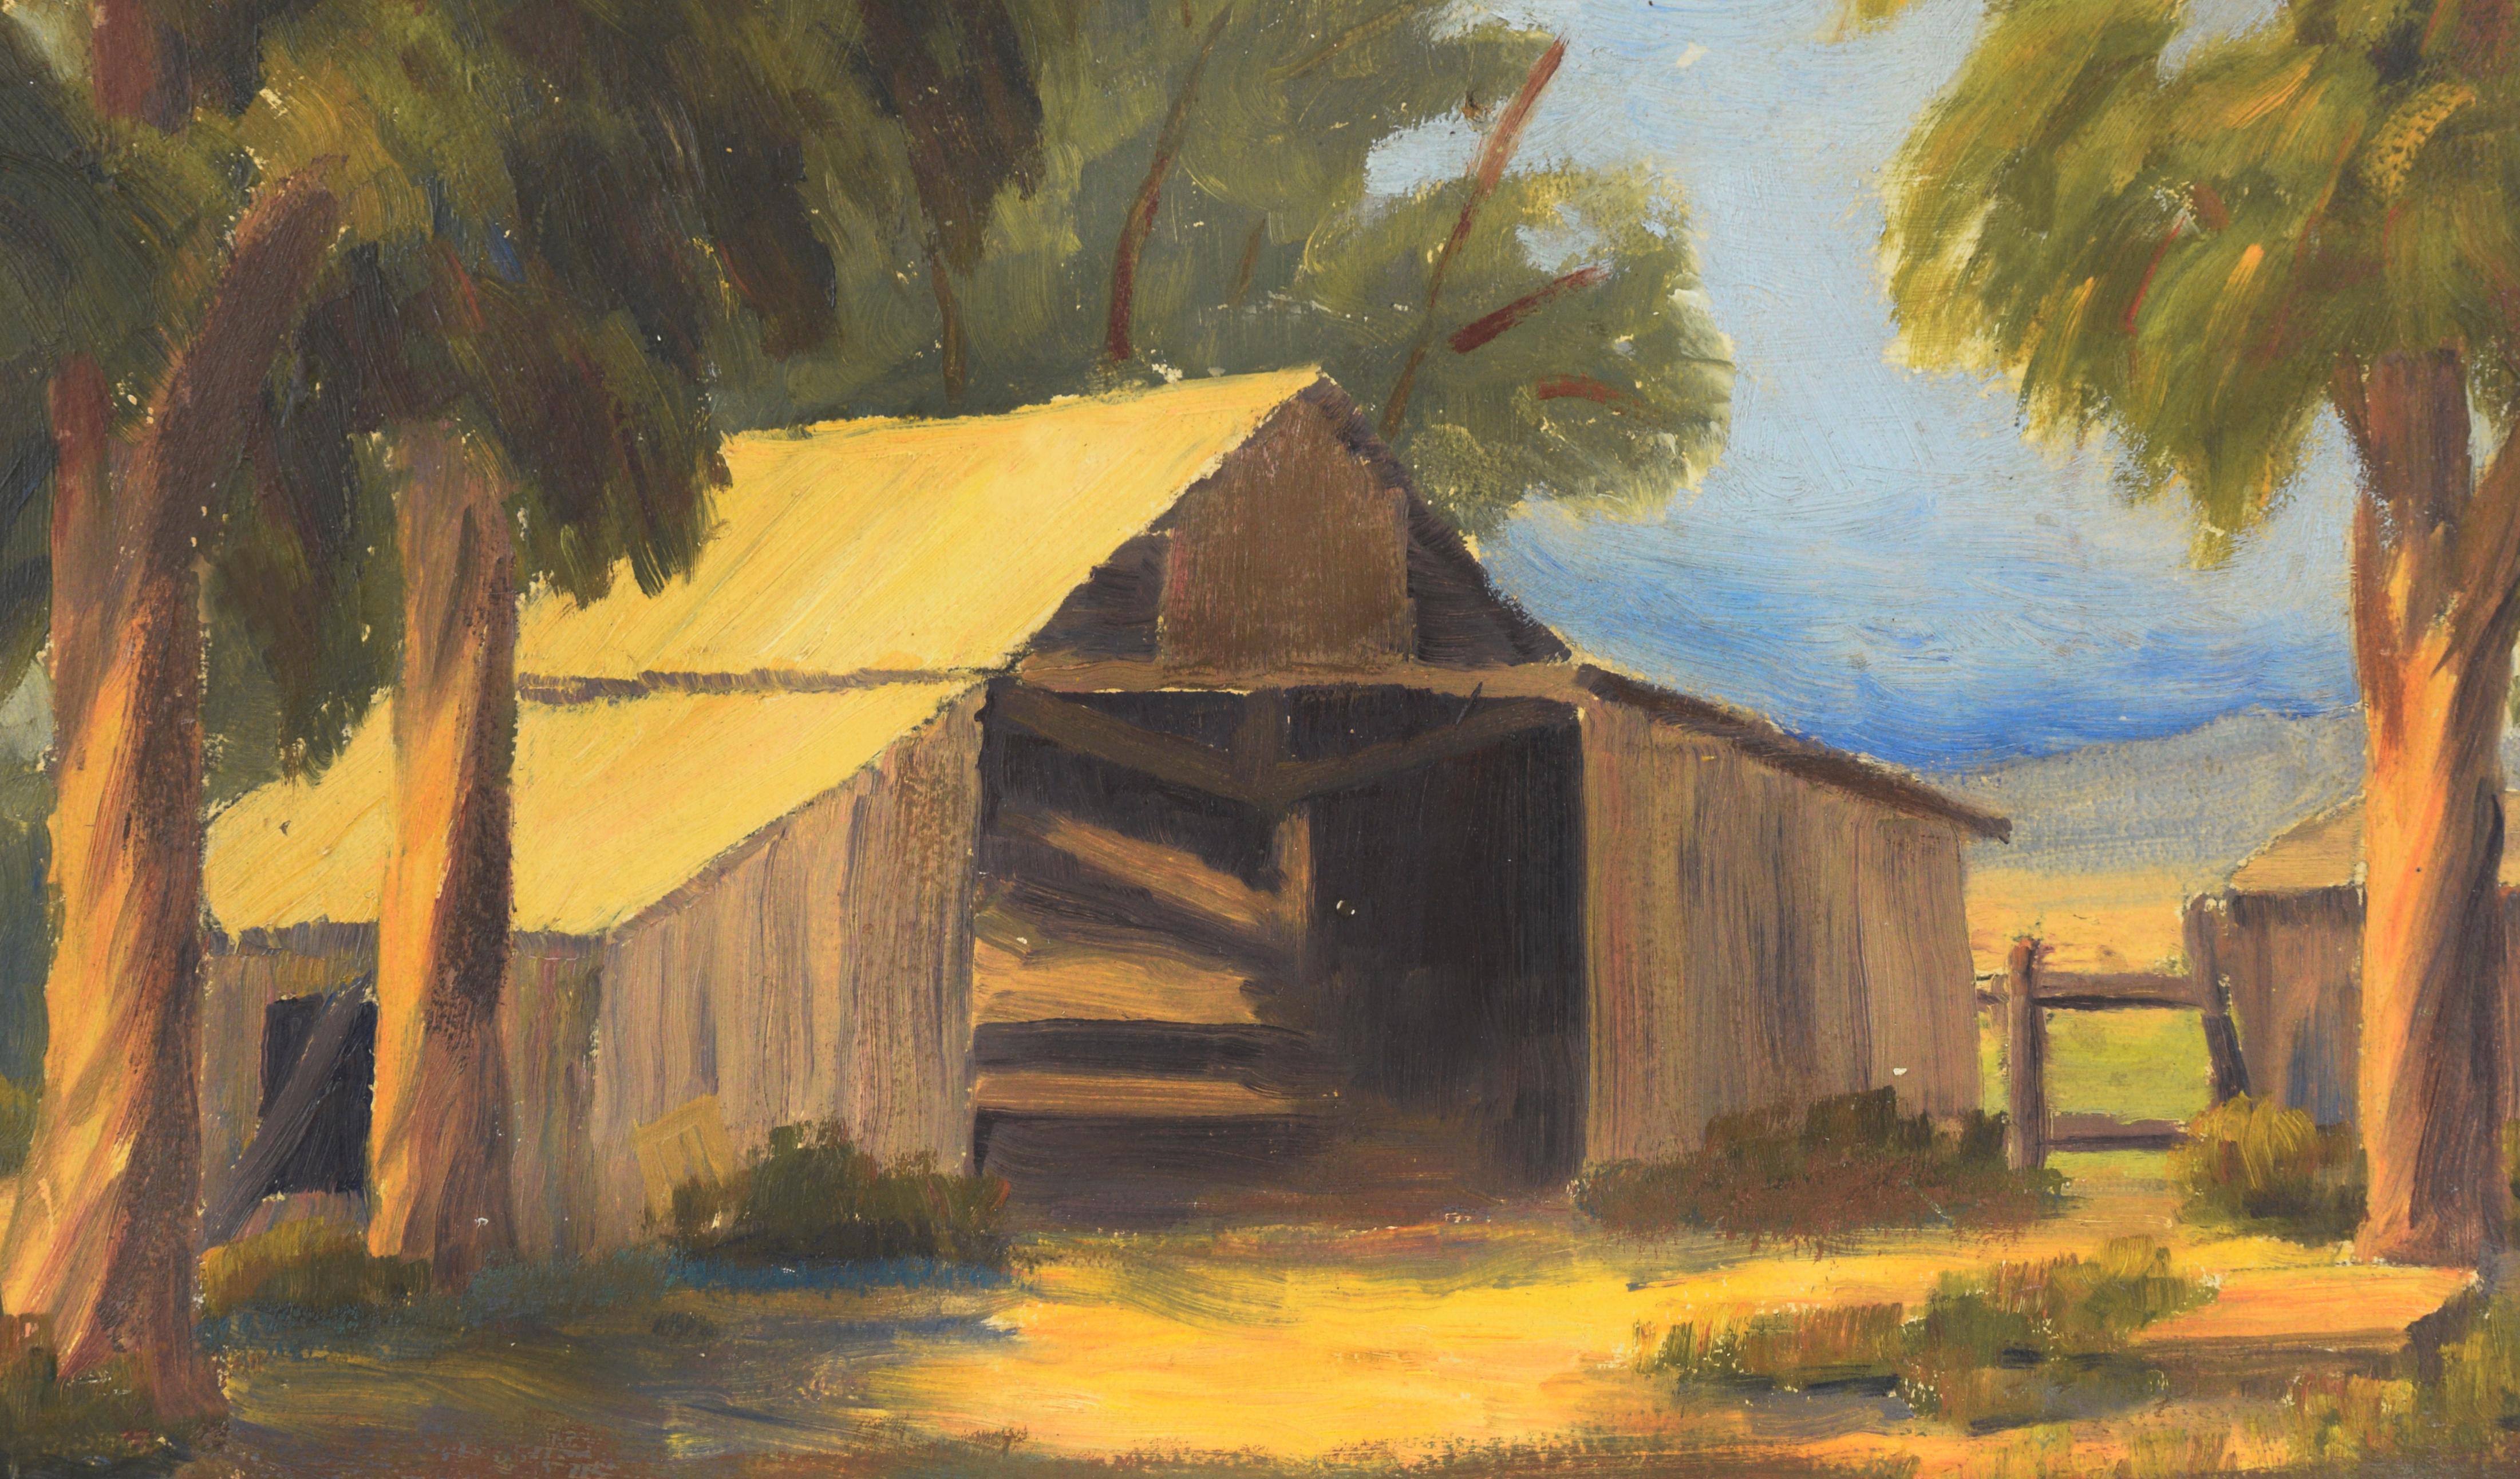 The Empty Barn - California Country Scene Oil on Canvas  - American Impressionist Painting by Unknown